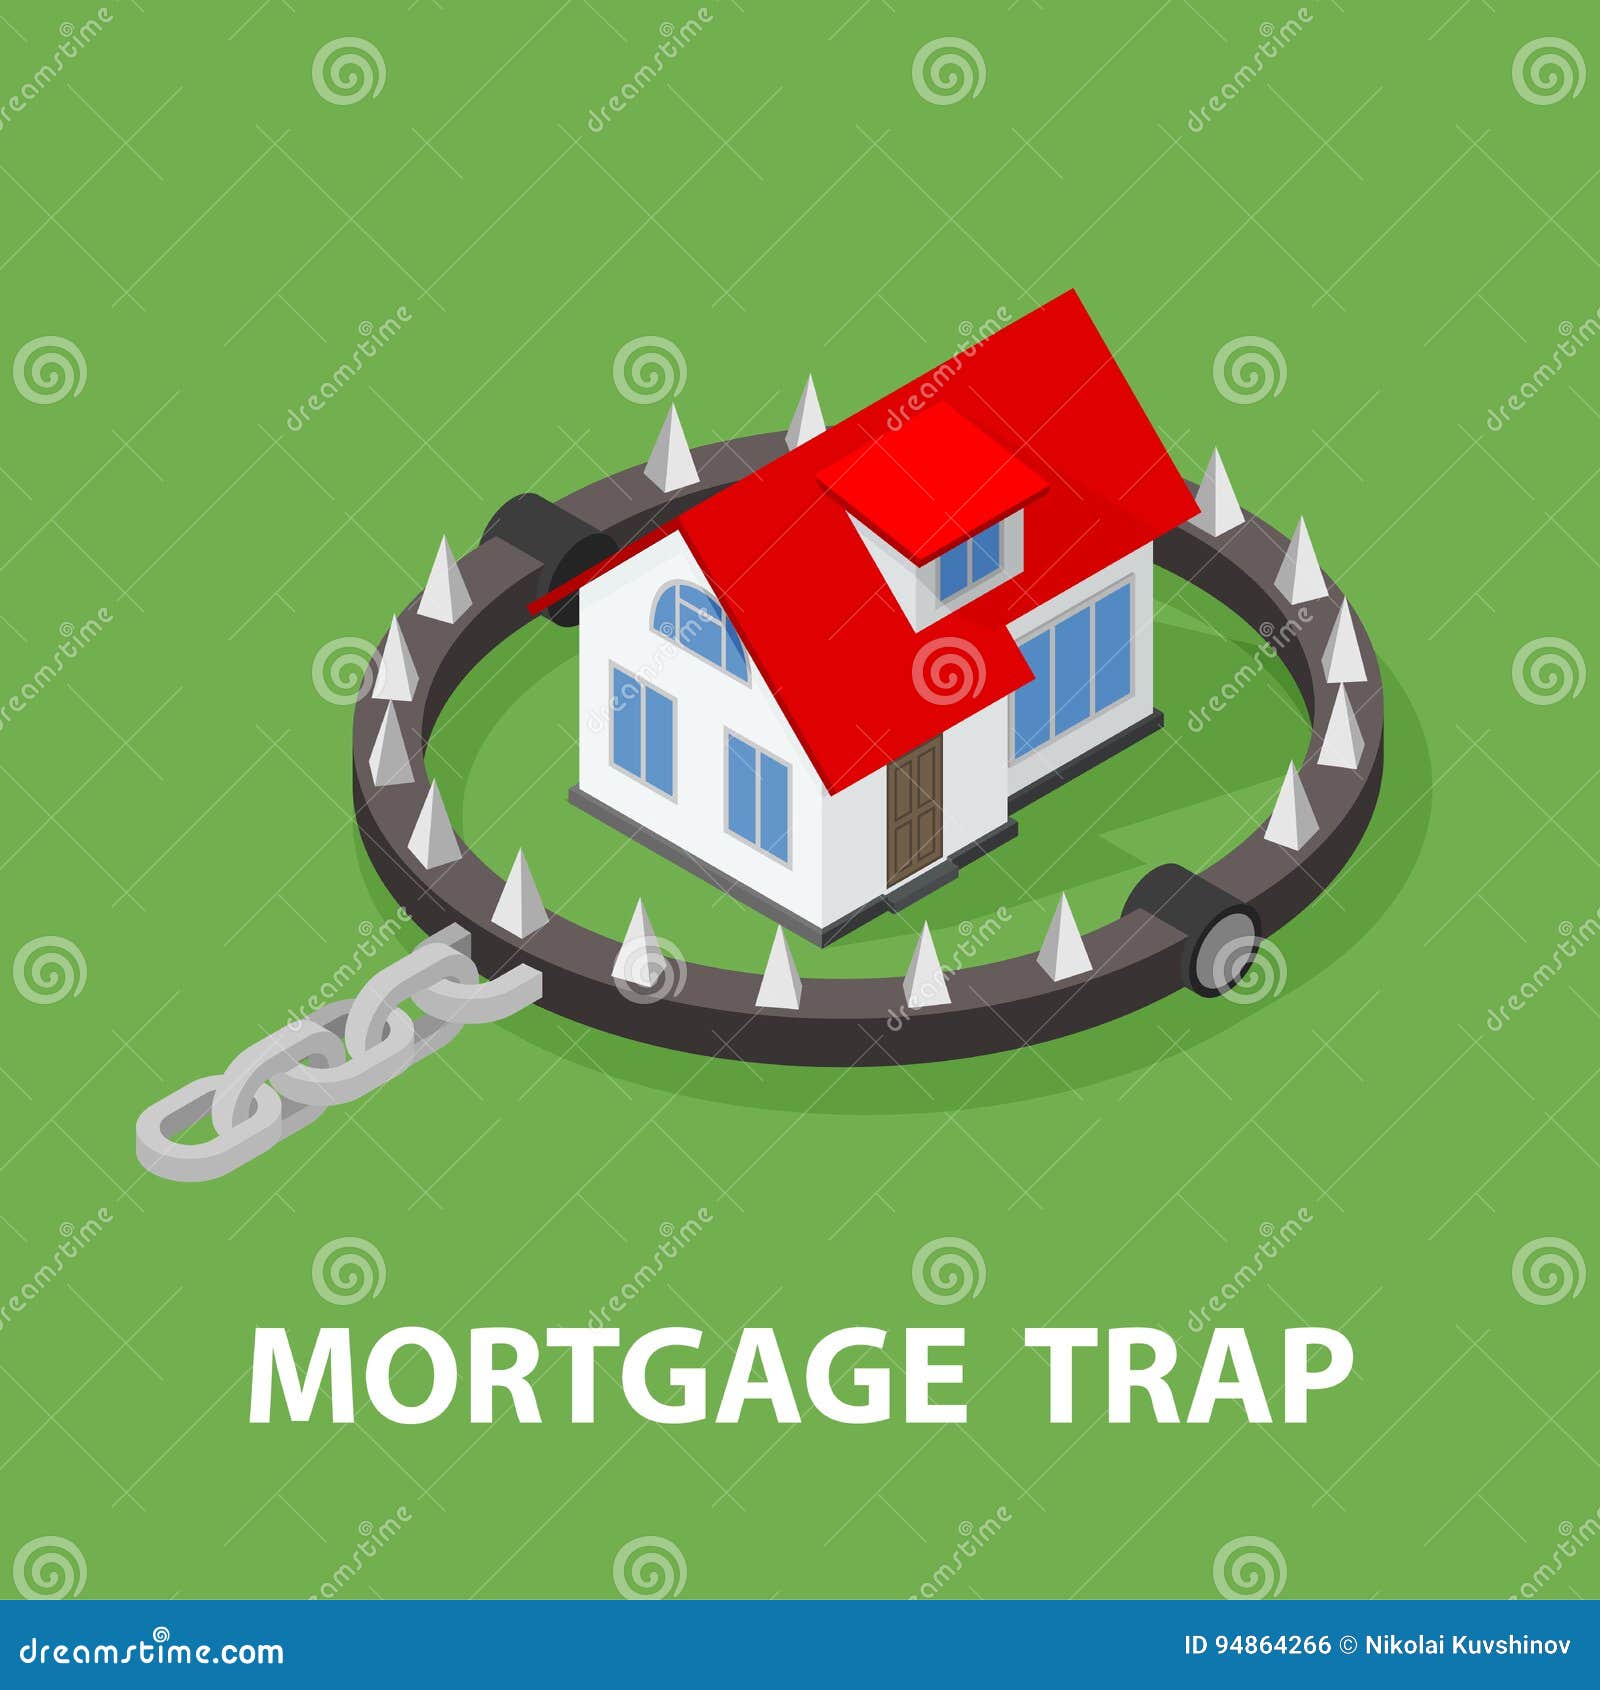 isometric mortgage house in bear trap.